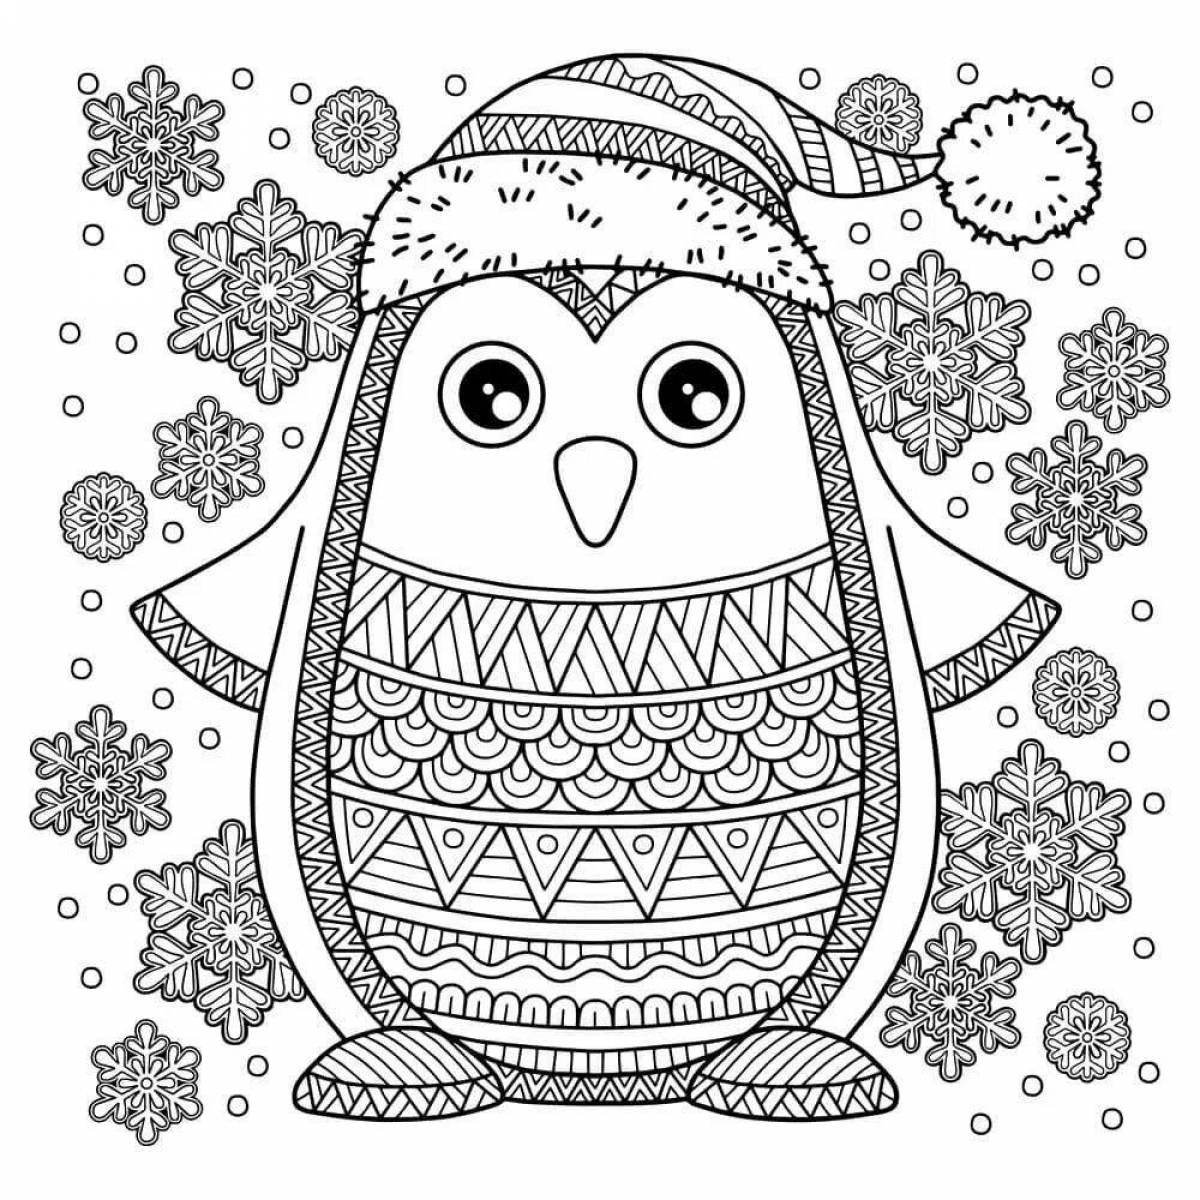 Awesome penguin coloring pages